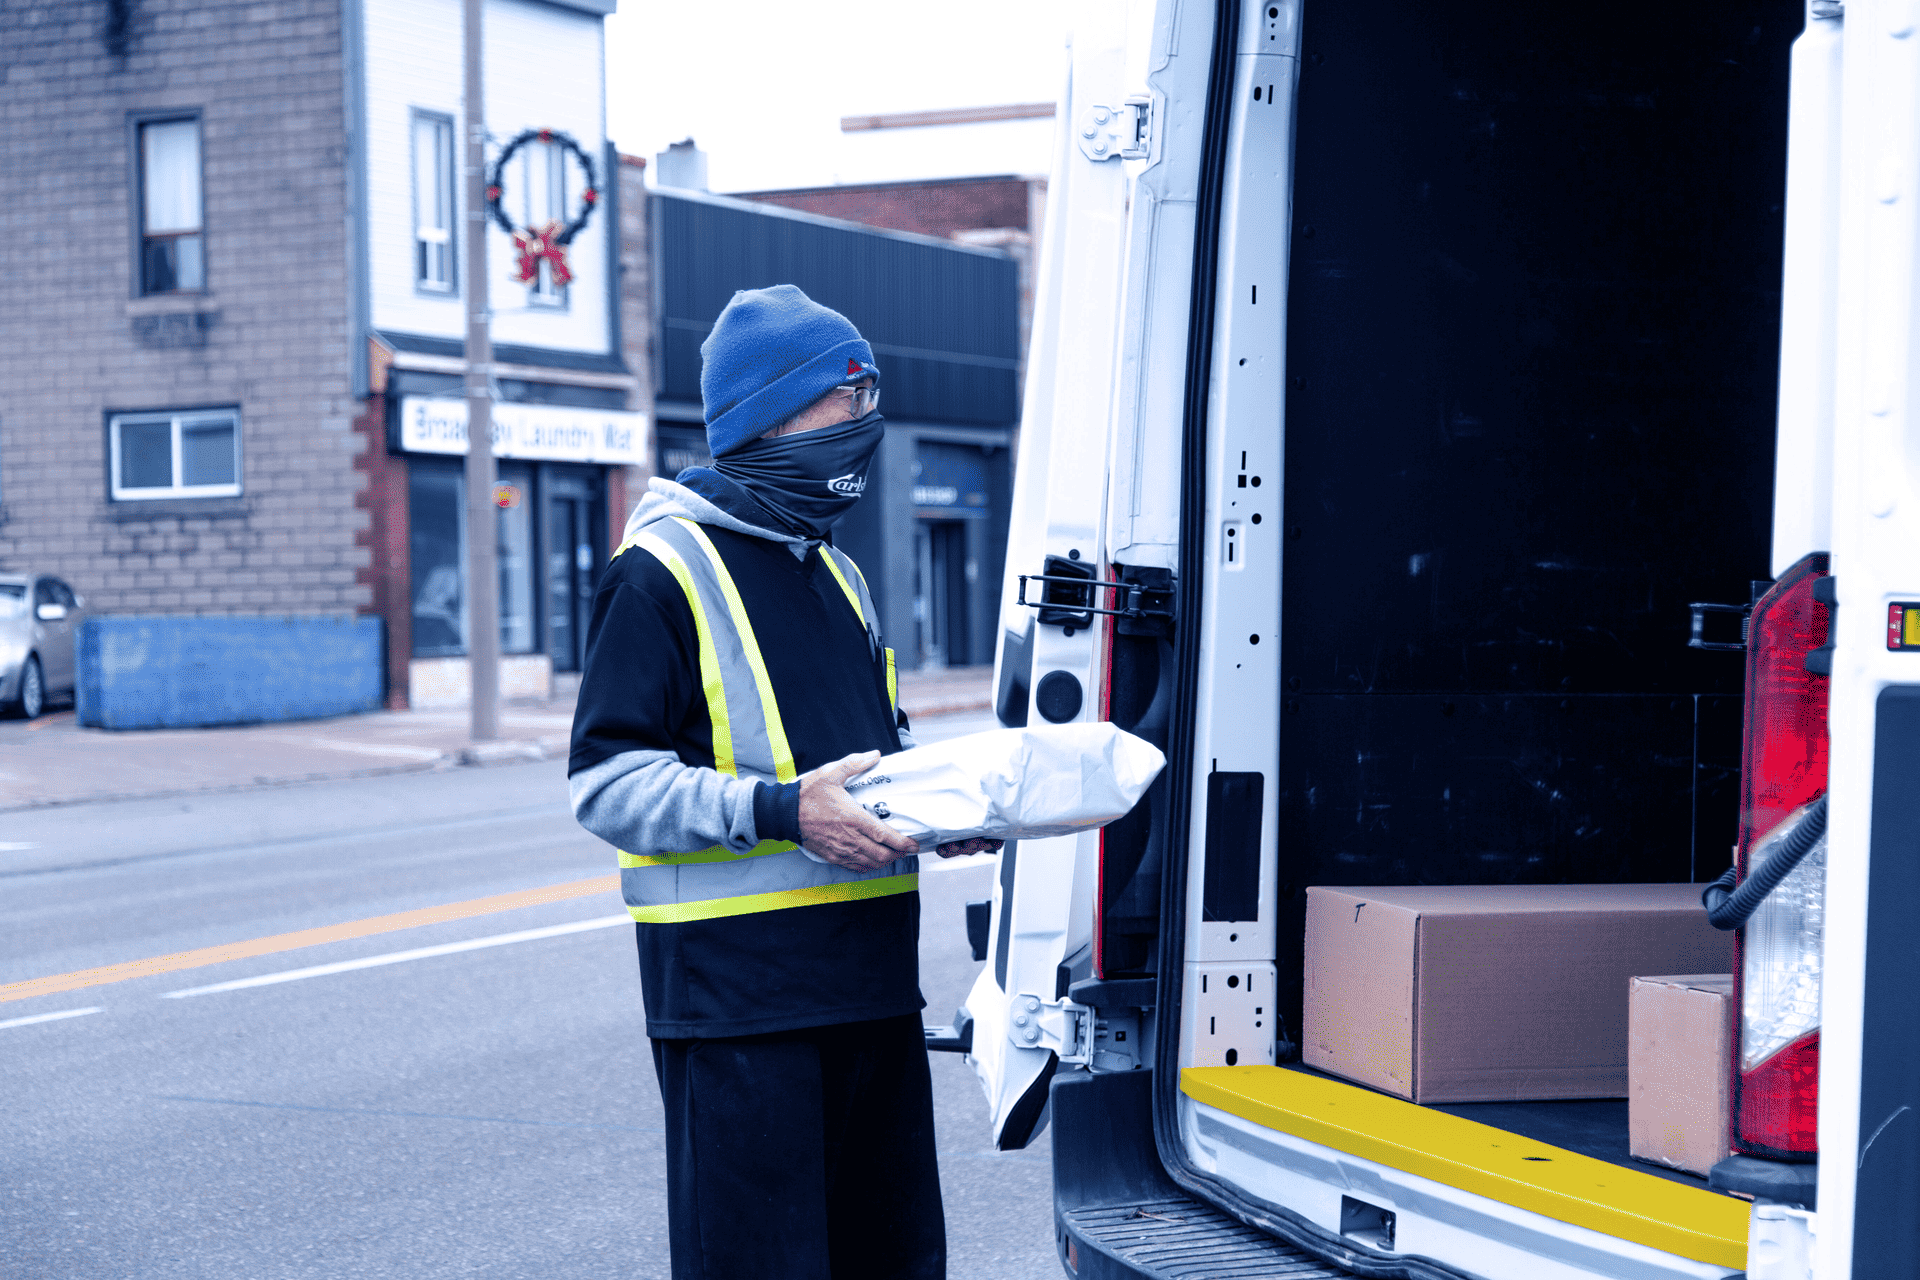 A service worker loading packages in a van during cold weather